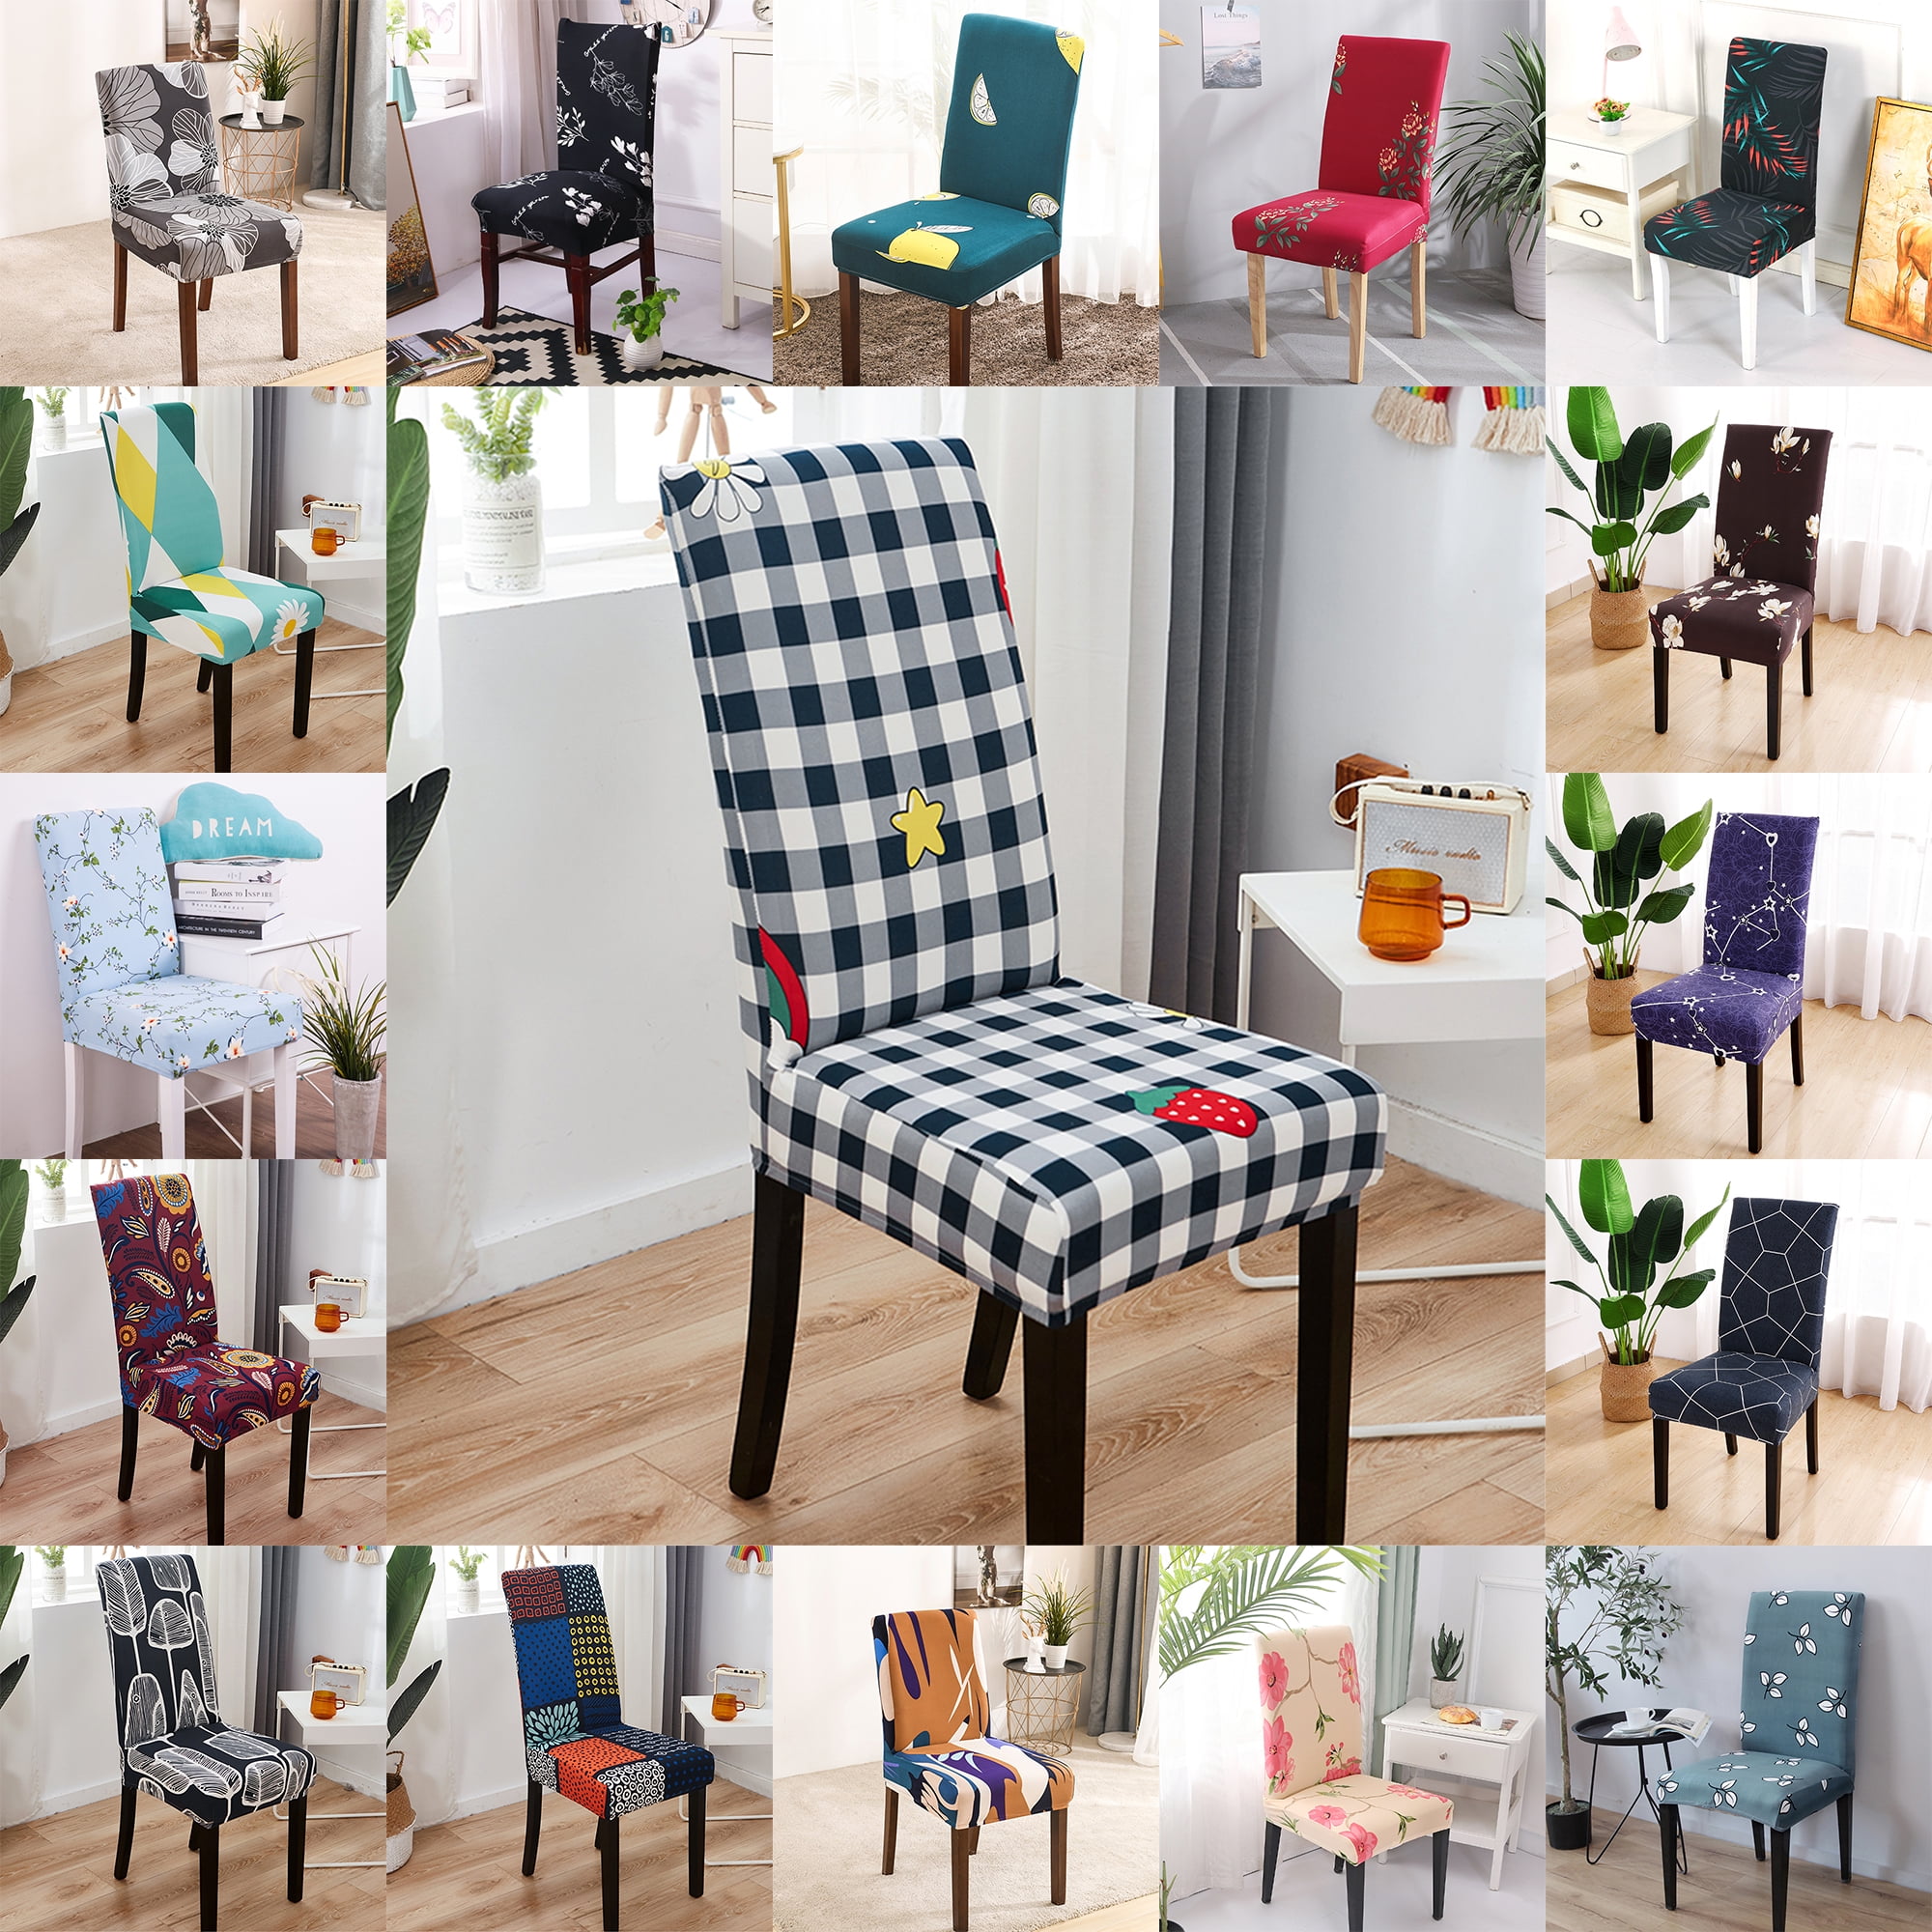 Dining Chair Covers Slipcovers Removable Stretch Banquet Seat Covers Xmas Decor 